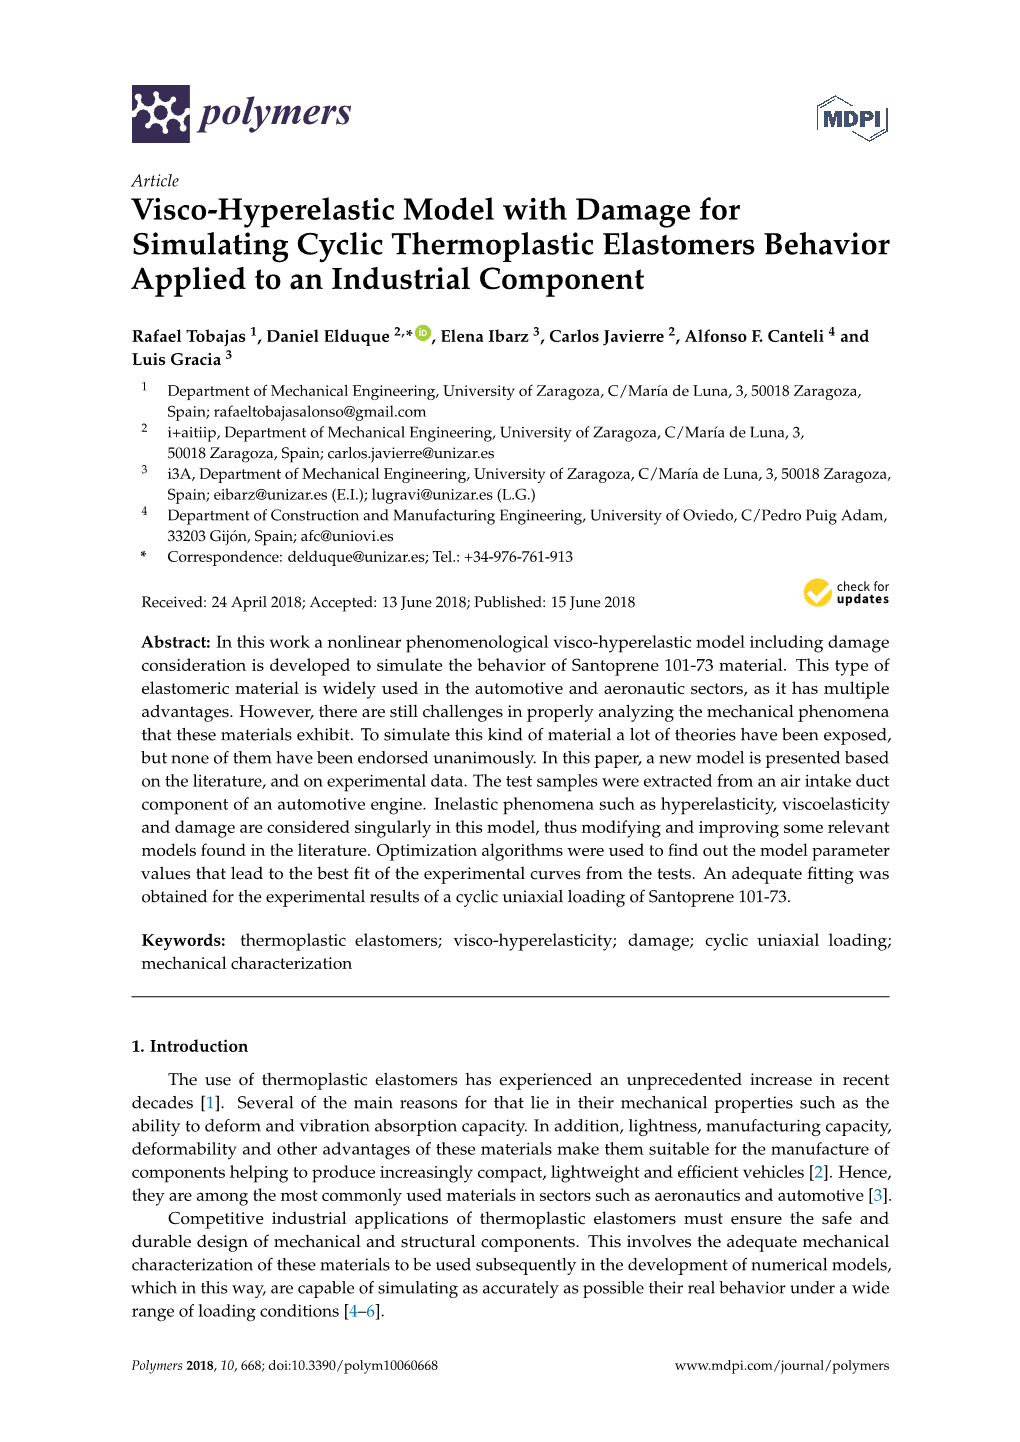 Visco-Hyperelastic Model with Damage for Simulating Cyclic Thermoplastic Elastomers Behavior Applied to an Industrial Component